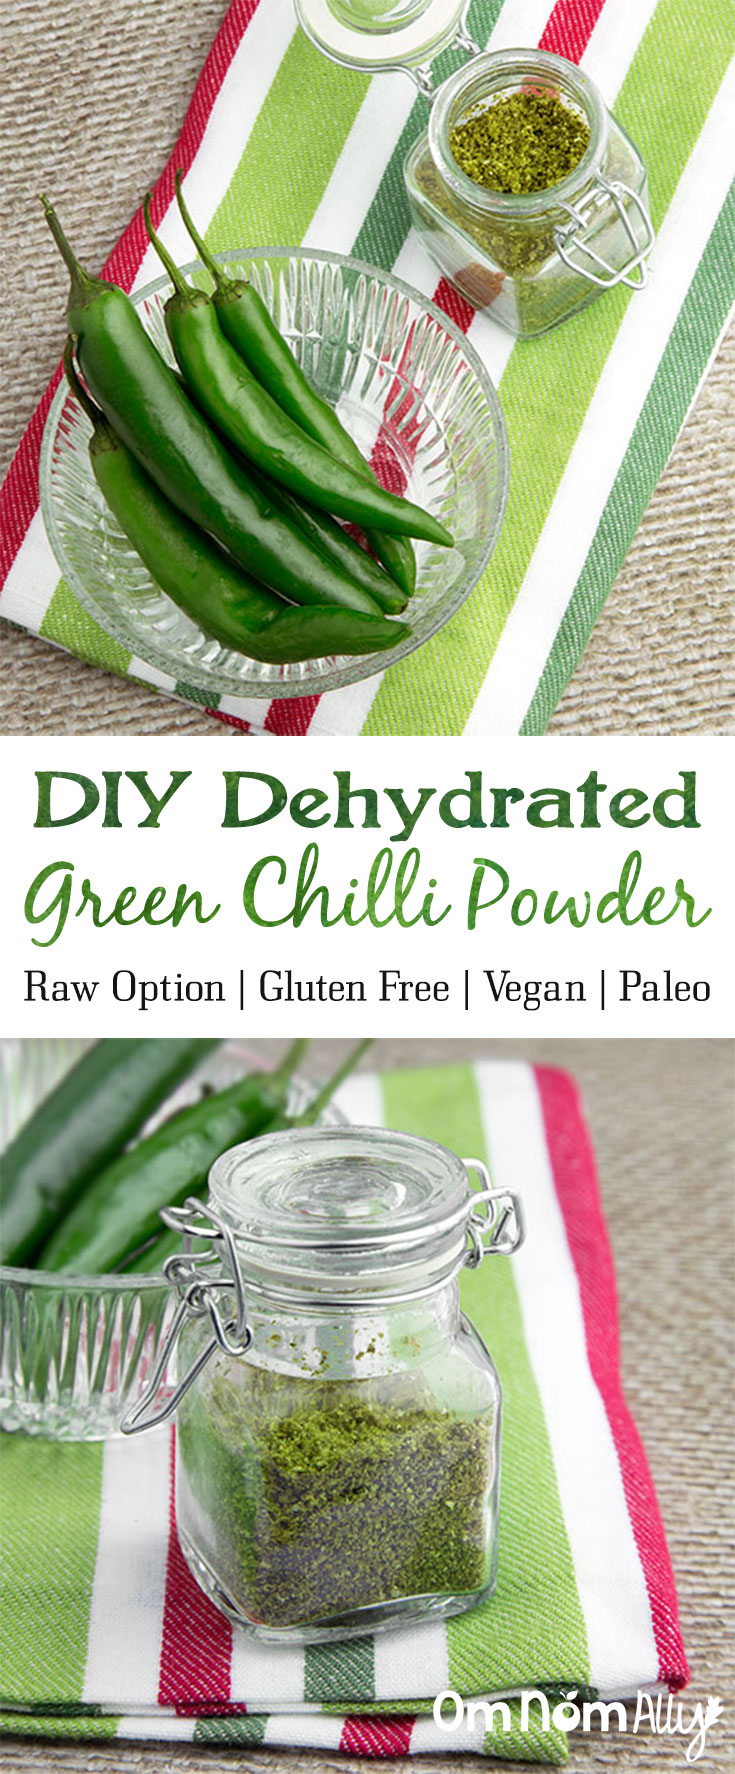 DIY Dehydrated Green Chilli Powder @OmNomAlly #Raw option, #glutenfree, #paleo, #vegan. Green chilli powder is one of those ingredients you'll hardly ever see in the shops - so just make your own! Packing a vibrant, spicy punch, try this Home-made Green Chilli Powder in your dehydrator.